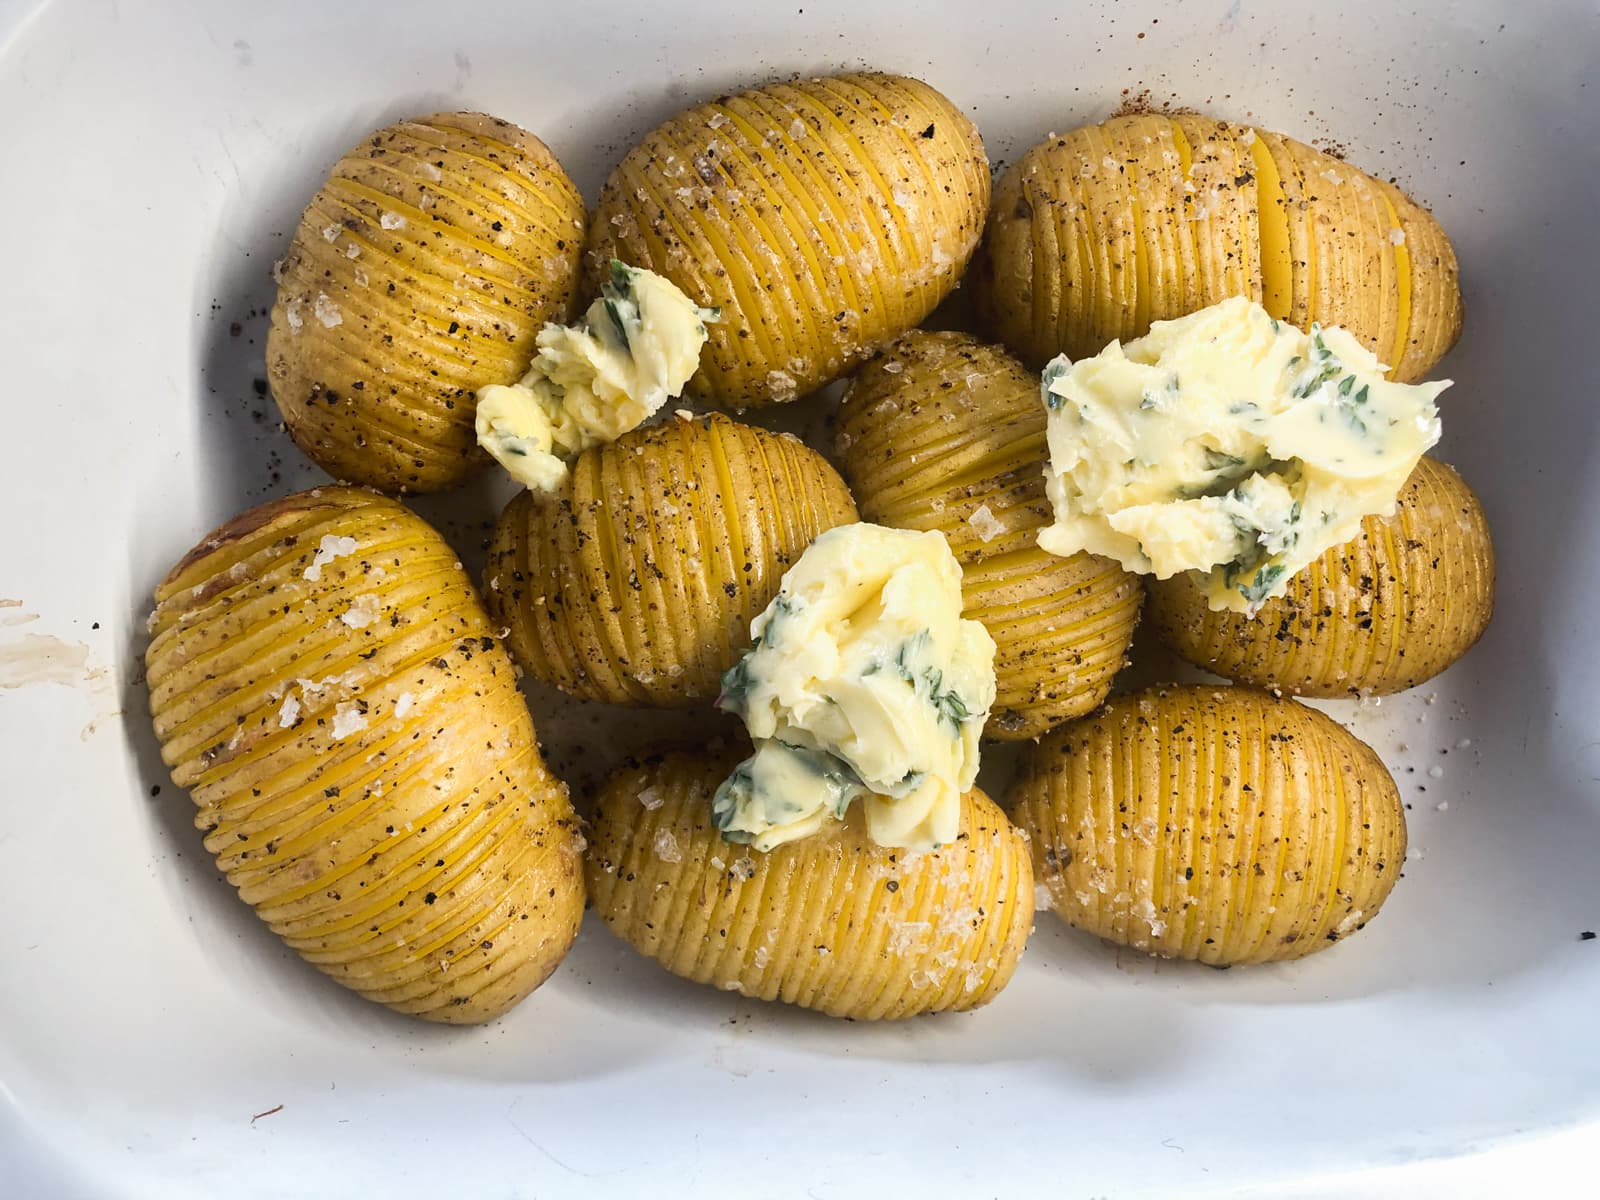 Added thyme butter to part baked hasselback potatoes.